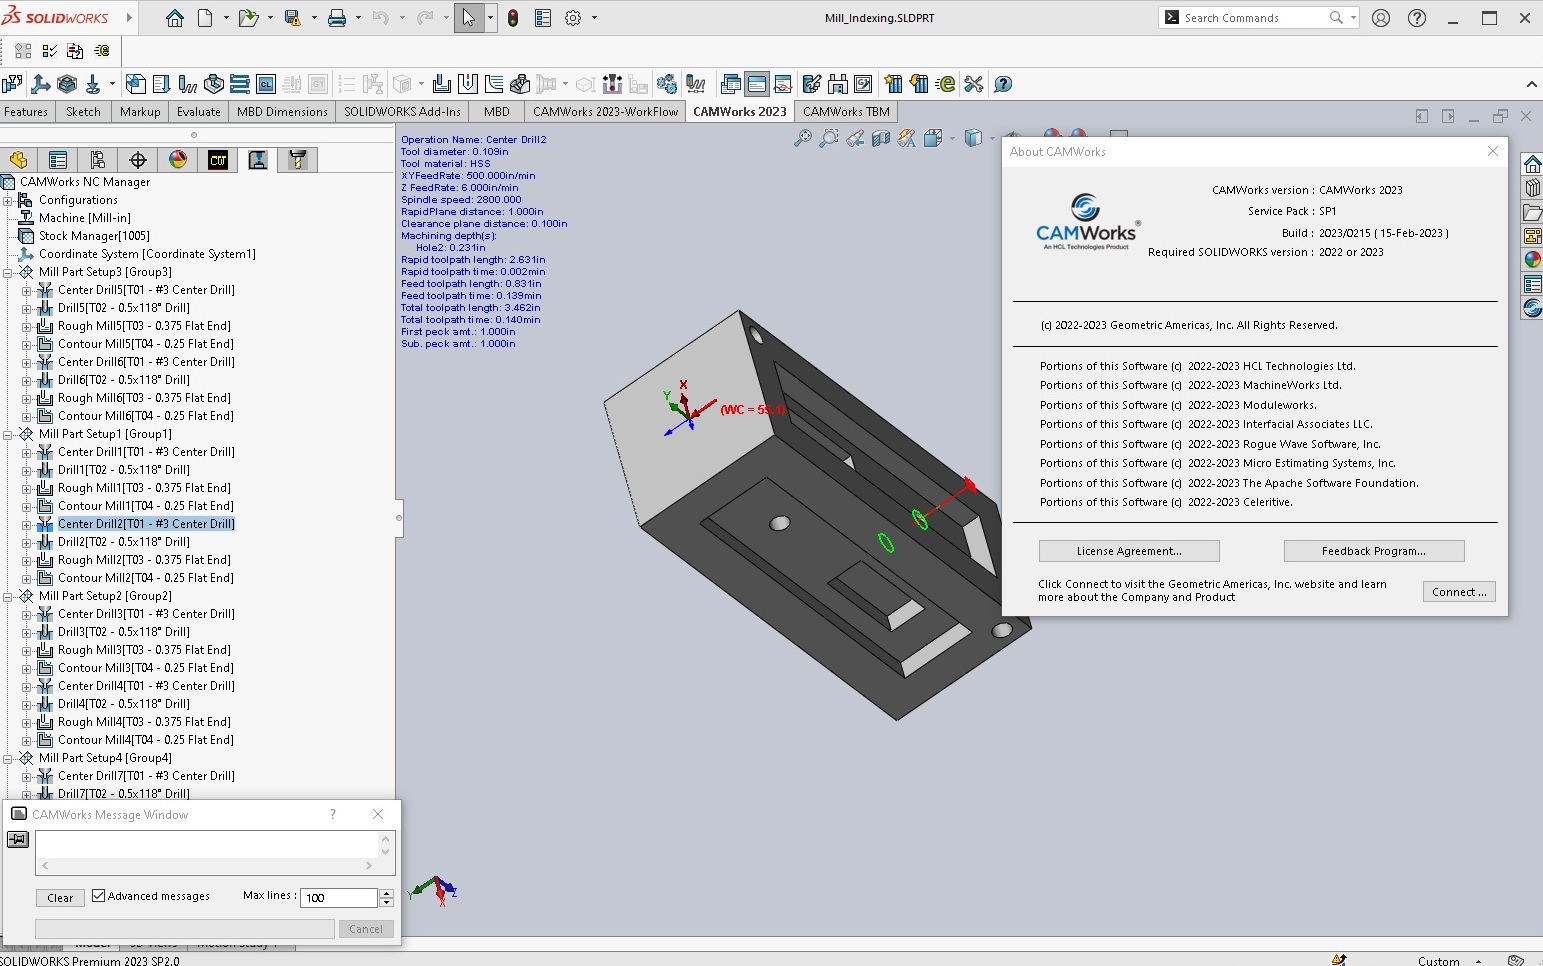 Working with CAMWorks 2023 SP1 for SolidWorks 2022-2023 full